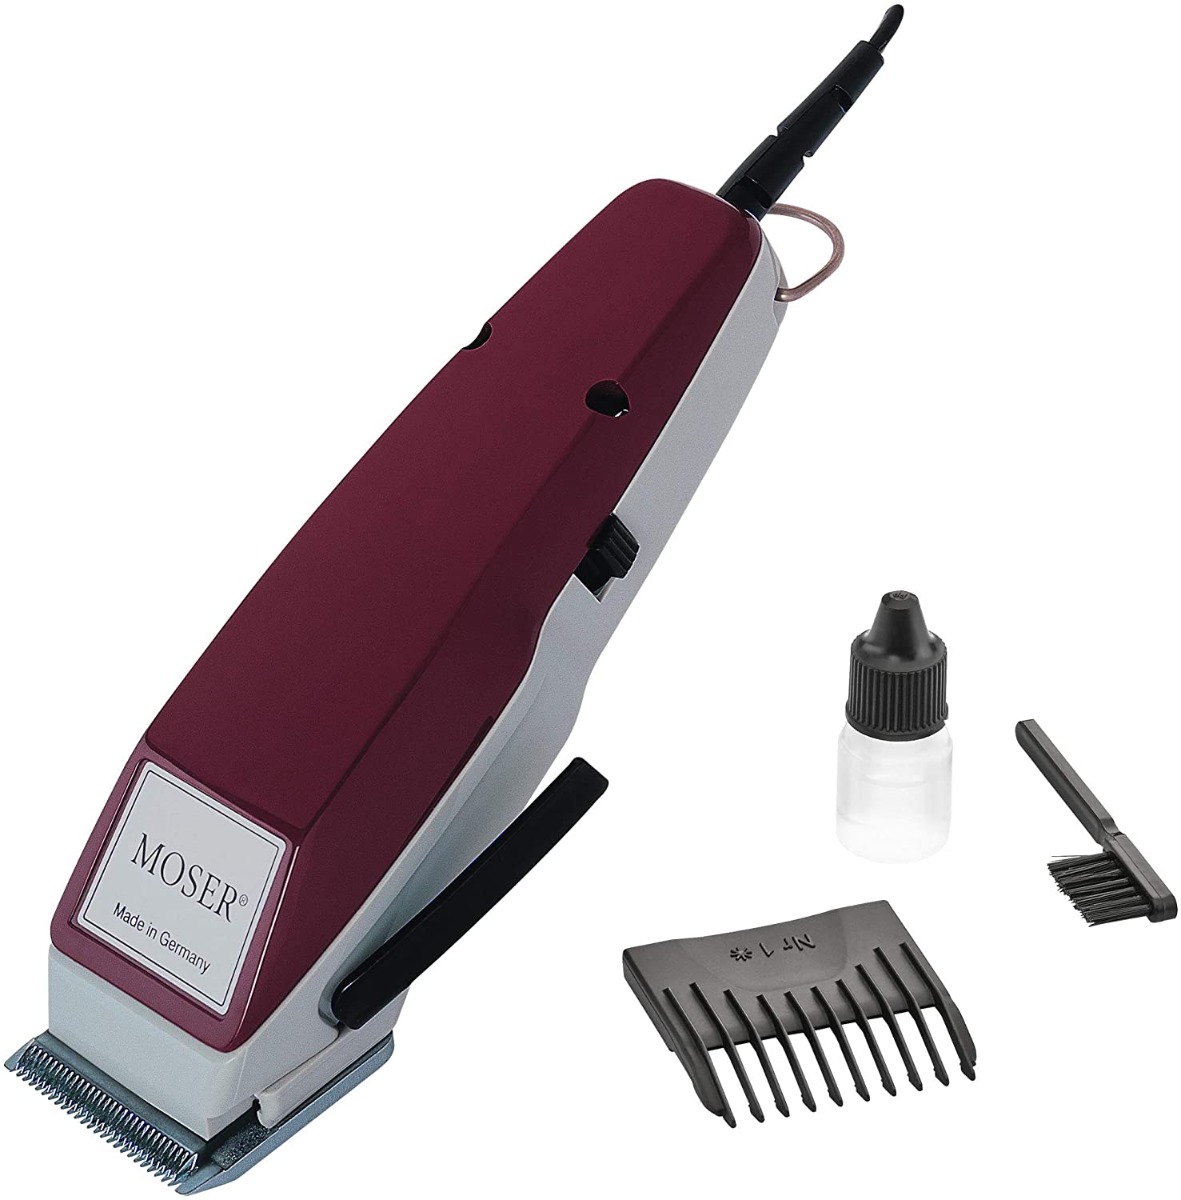 Moser Profiline Corded Hair Clipper, Red - 1400-0291